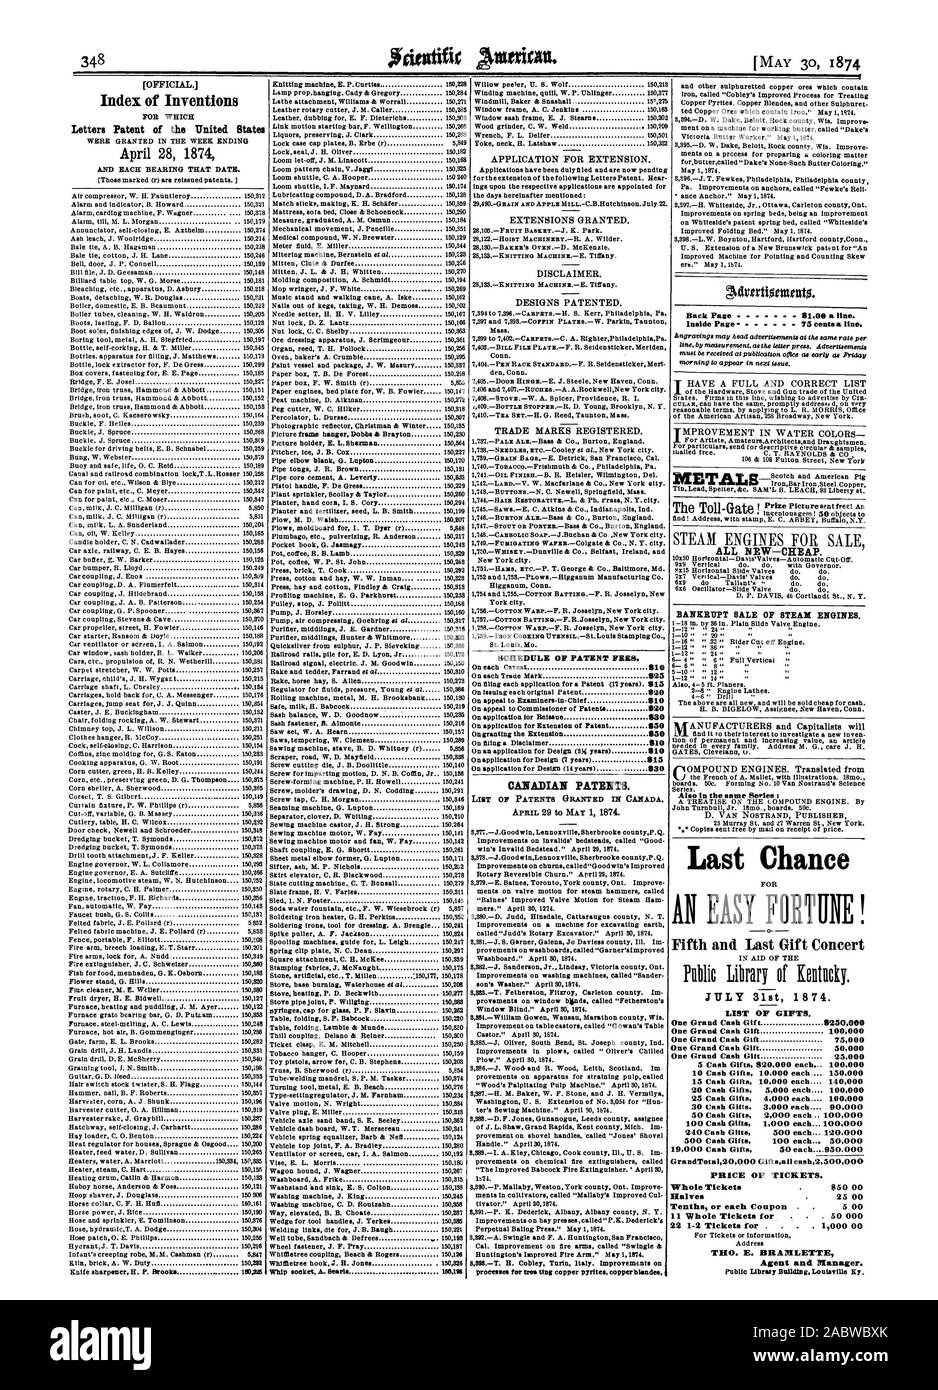 Index of Inventions Letters Patent of the United States SCHEDULE OF PATENT FEES. 820 810 820 830 850 850 810 810 815 830 CANADIAN PATENTS. BANKRUPT BALE OF STEAM ENGINES. Also in the same Series : Last Chance AN EASY FORTUNE! JULY 31st 1874. LIST OF GIFTS. One Grand Cash Gilt 25000 5 Cash Gifts S20000 each 100000 25 Cash Gifts 50 Cash Gifts 100 Cash Gifts 240 Cash Gilts 500 Cash Gifts 4000 each 100.000 3000 each 90.000 2000 each  100000 1000 each. 100000 500 each. 120.000 100 each. 50000 50 each950.000 GrandTotal20000 Giftsall cash2500000 PRICE OF TICKETS. Halves 25 00 Tenths or each Coupon Stock Photo